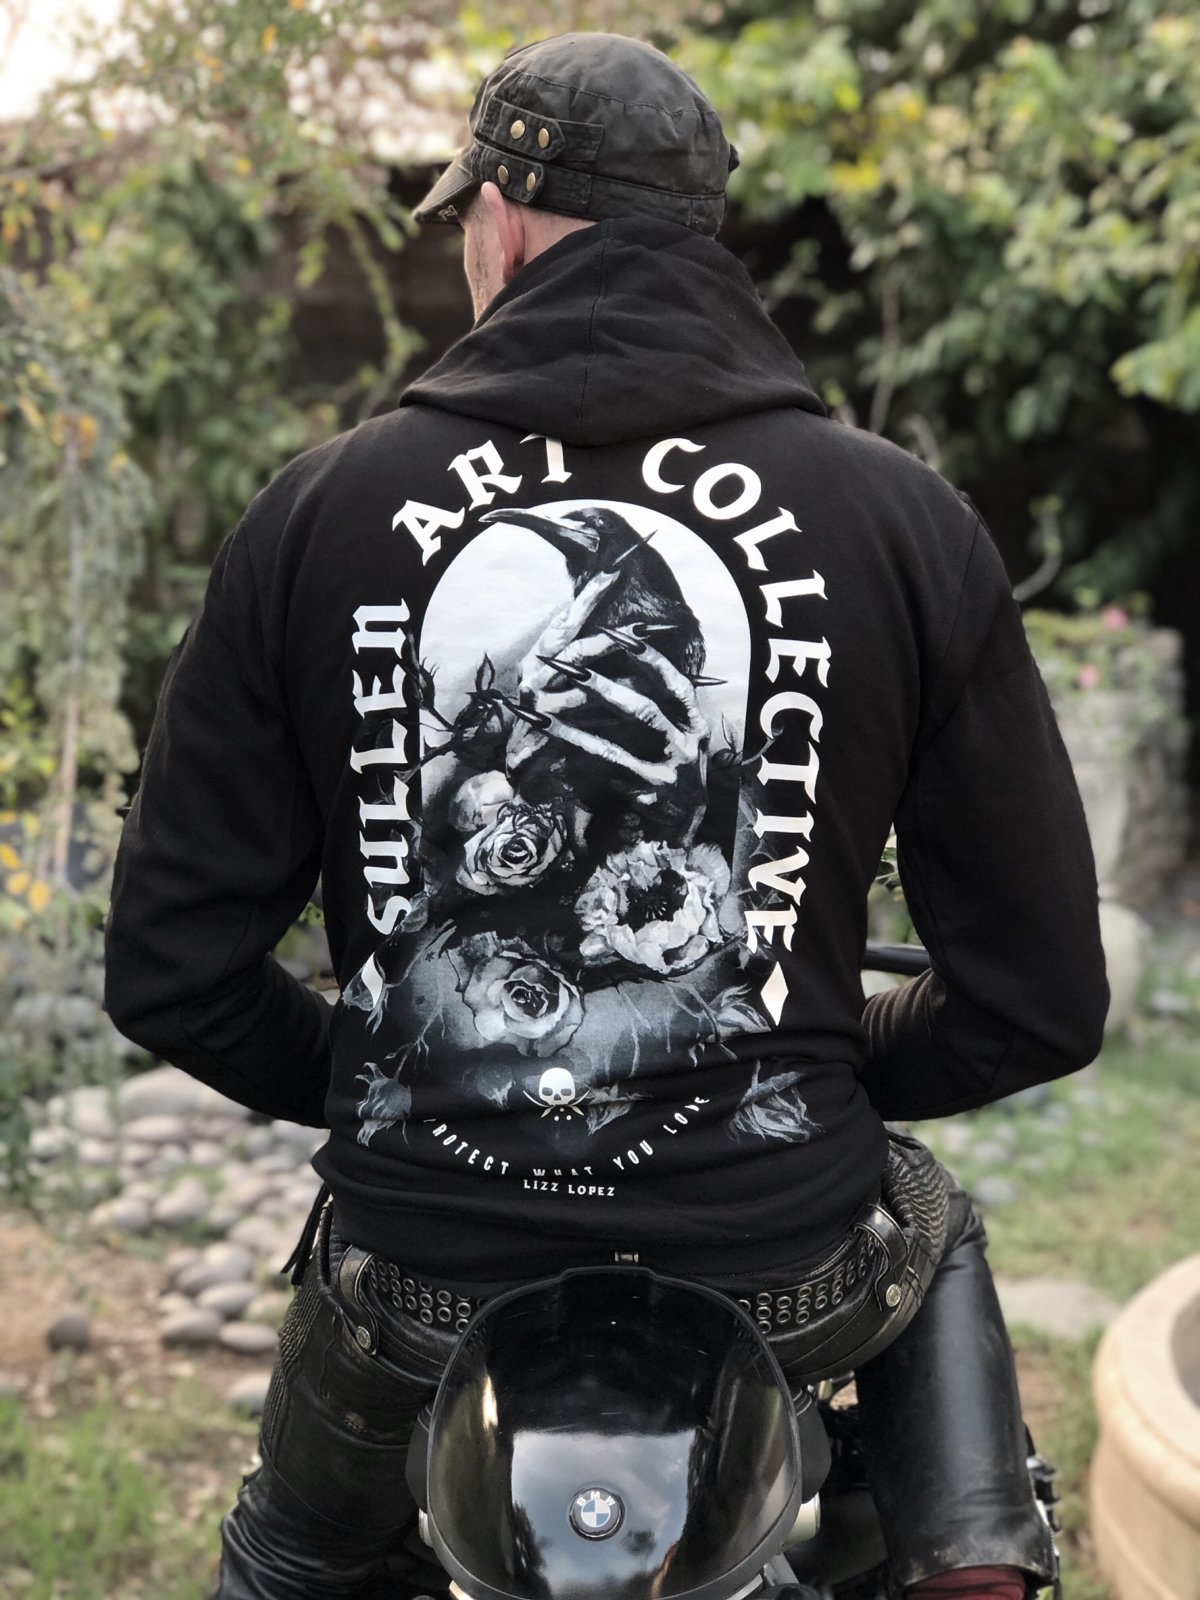 Protect What You Love hoody by Sullen Clothing and Lizz Lopez